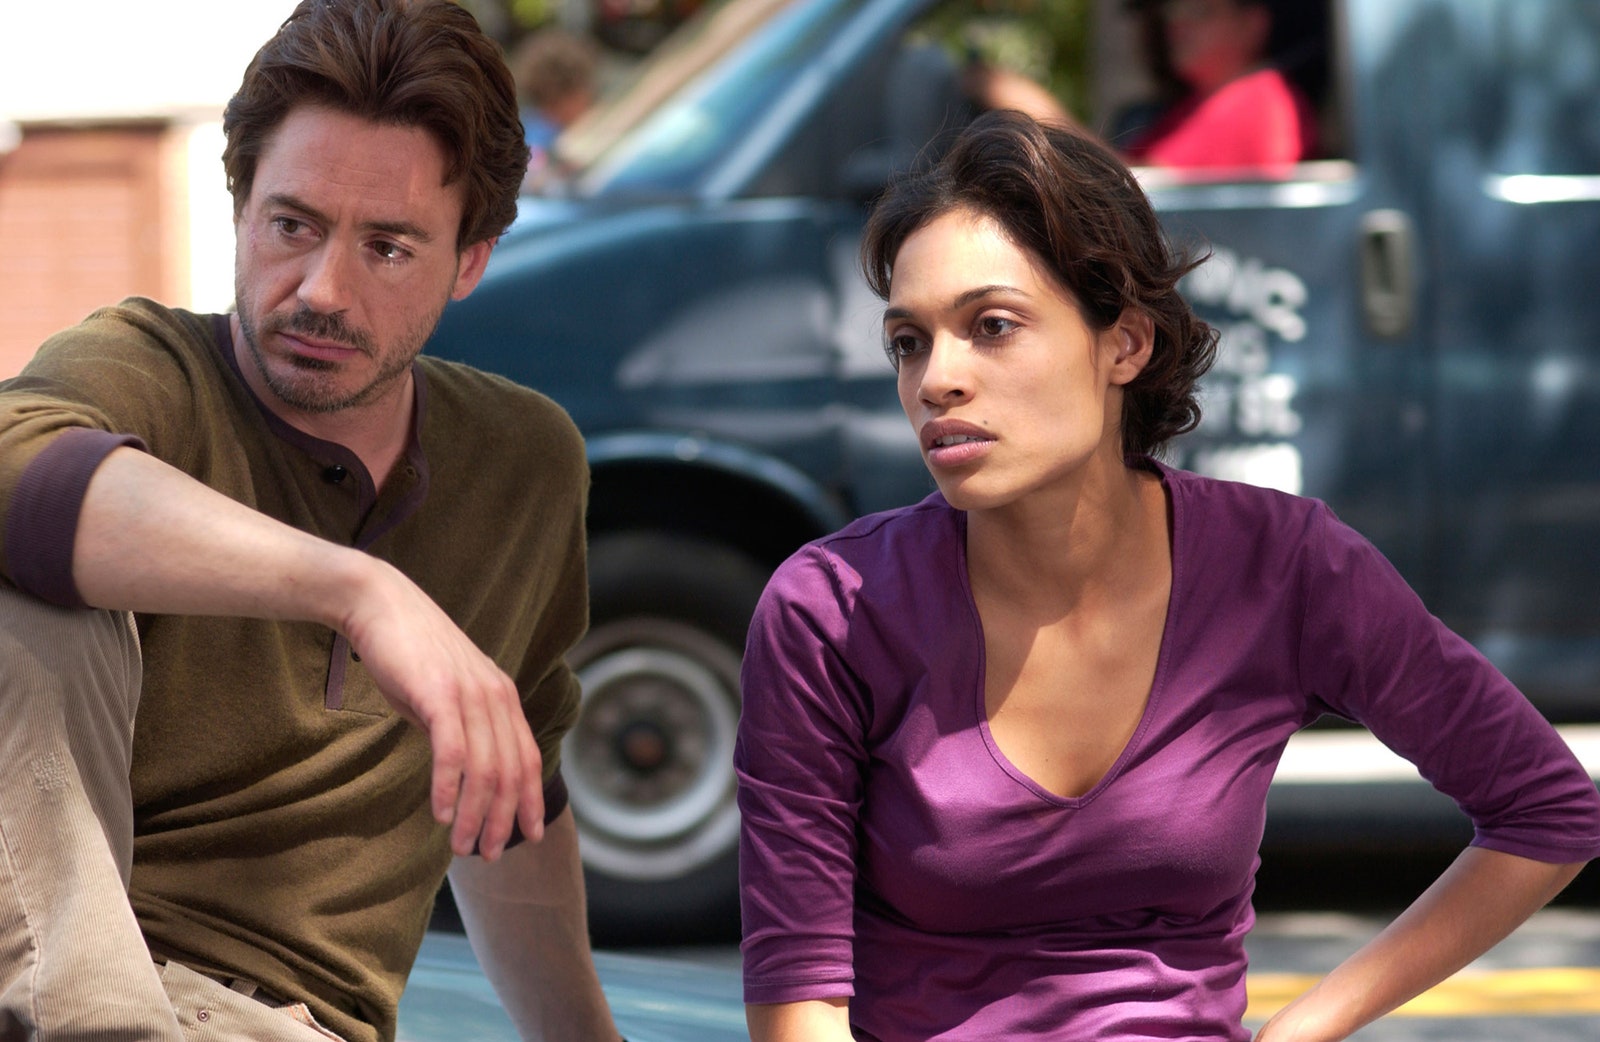 Robert Downey Jr. with Rosario Dawson in A Guide to Recognizing Your Saints.